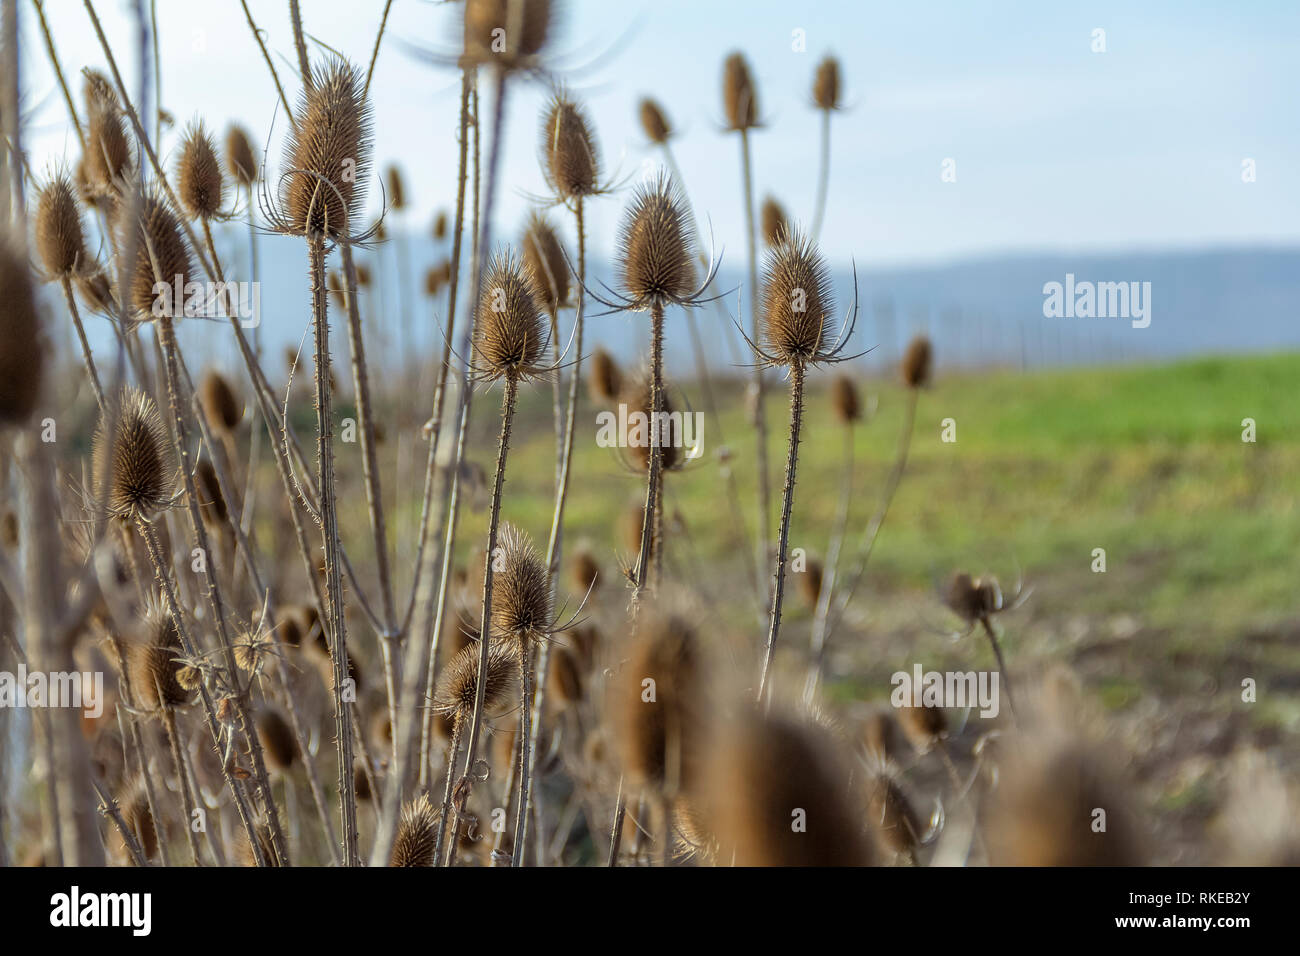 sere teasel plants at autumn time Stock Photo